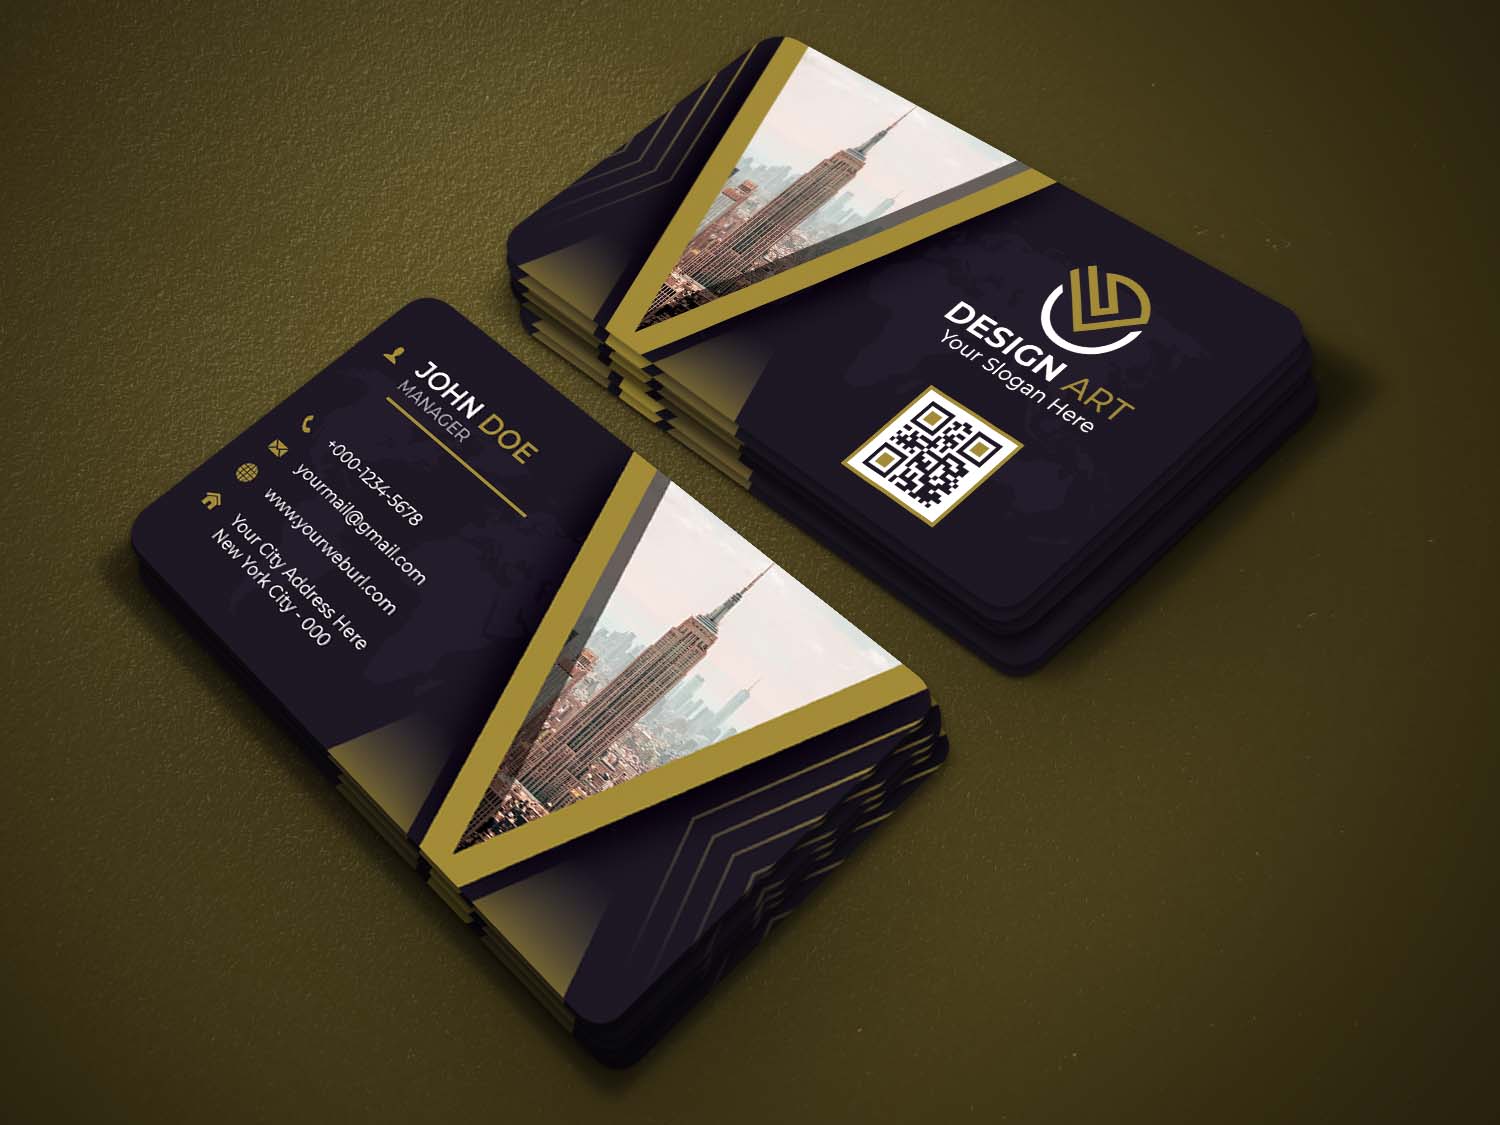 Set of three business cards on a table.